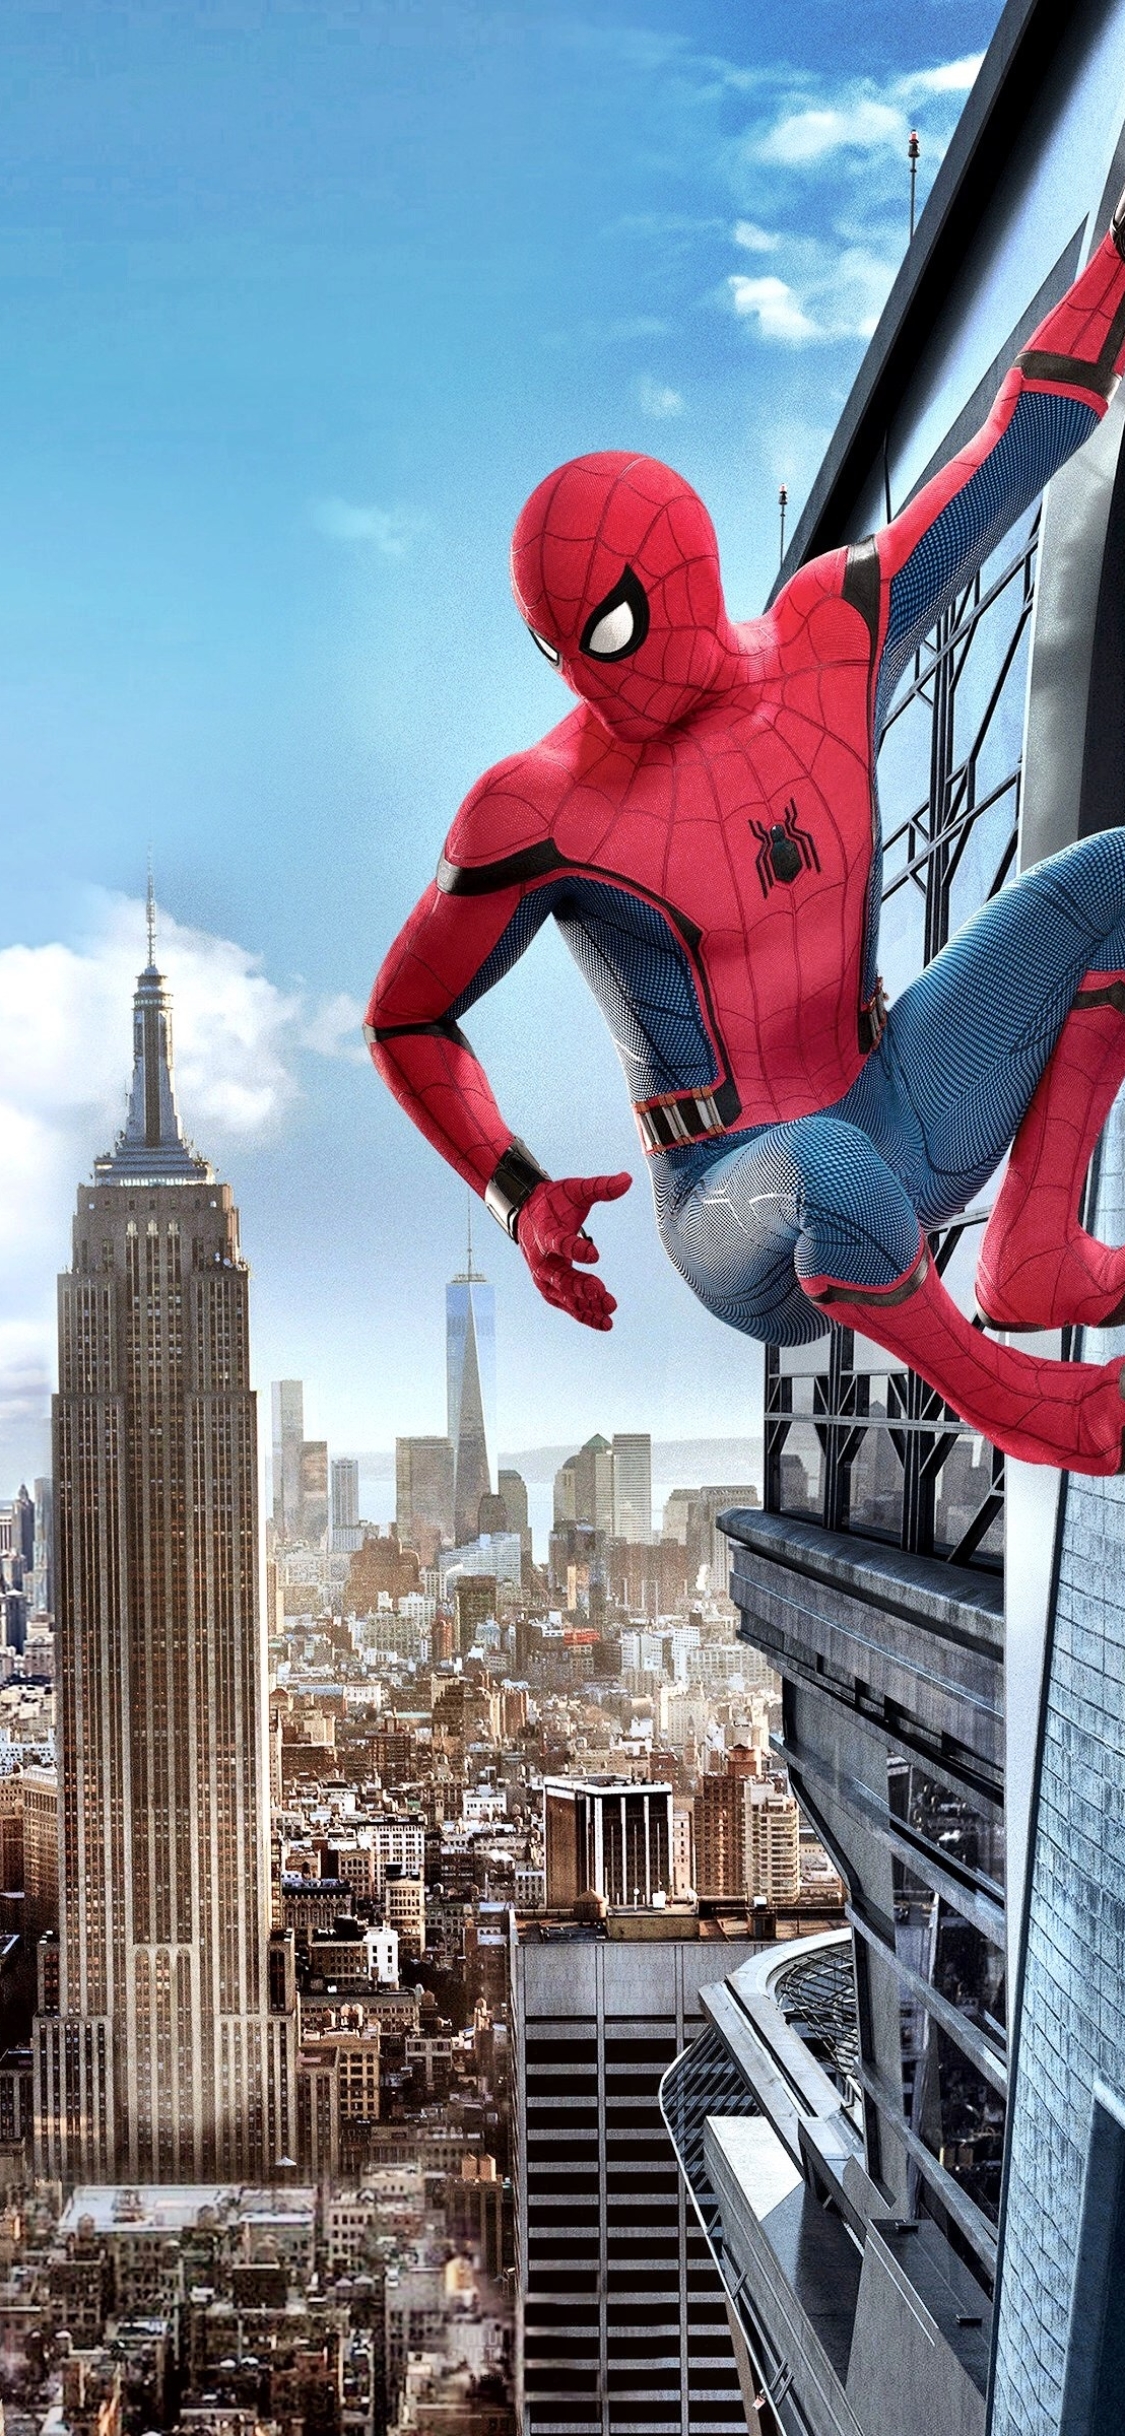 wallpapers empire state building, movie, spider man: homecoming, new york, spider man, tom holland, building